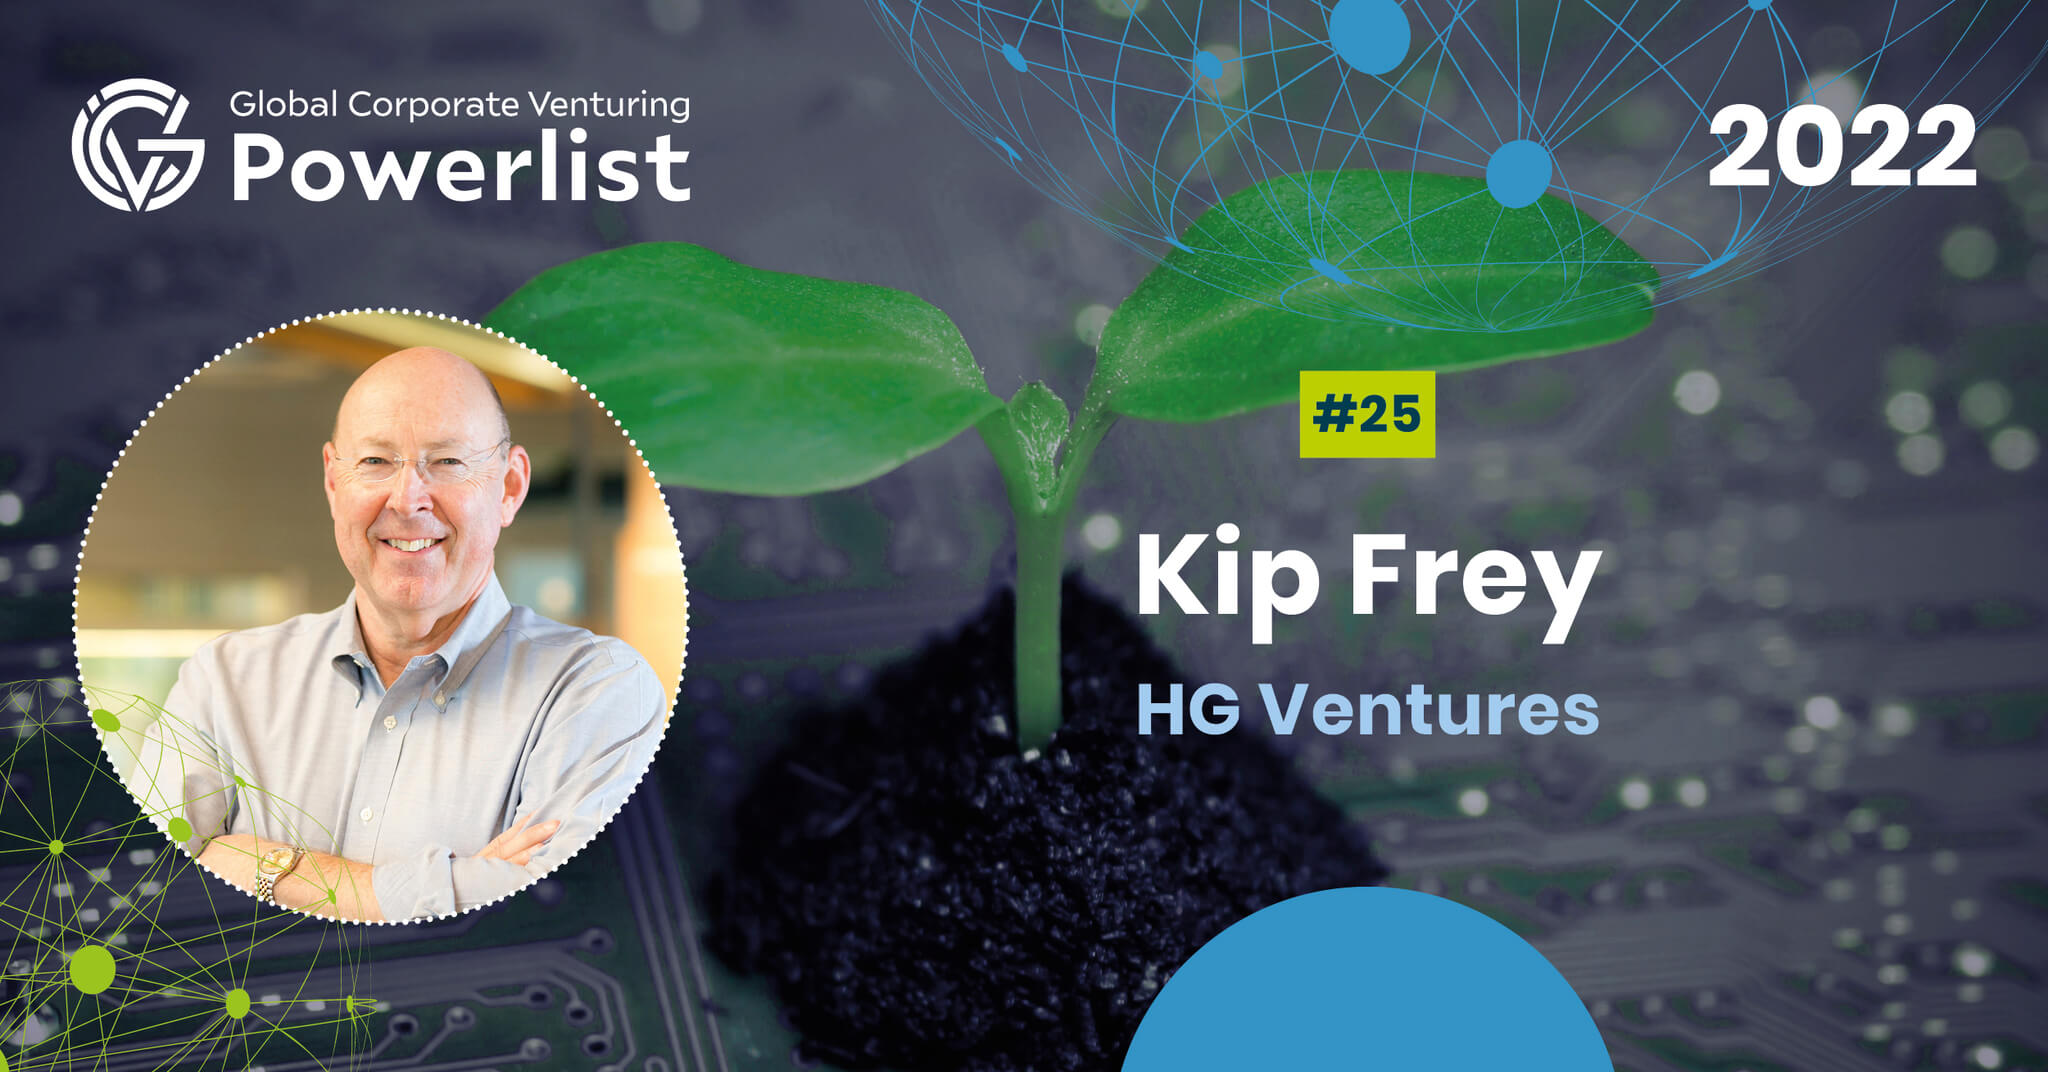 HG Ventures’ Managing Director Cracks the Top 25 on Annual List of Most Prominent Corporate Venture Capitalists in the World